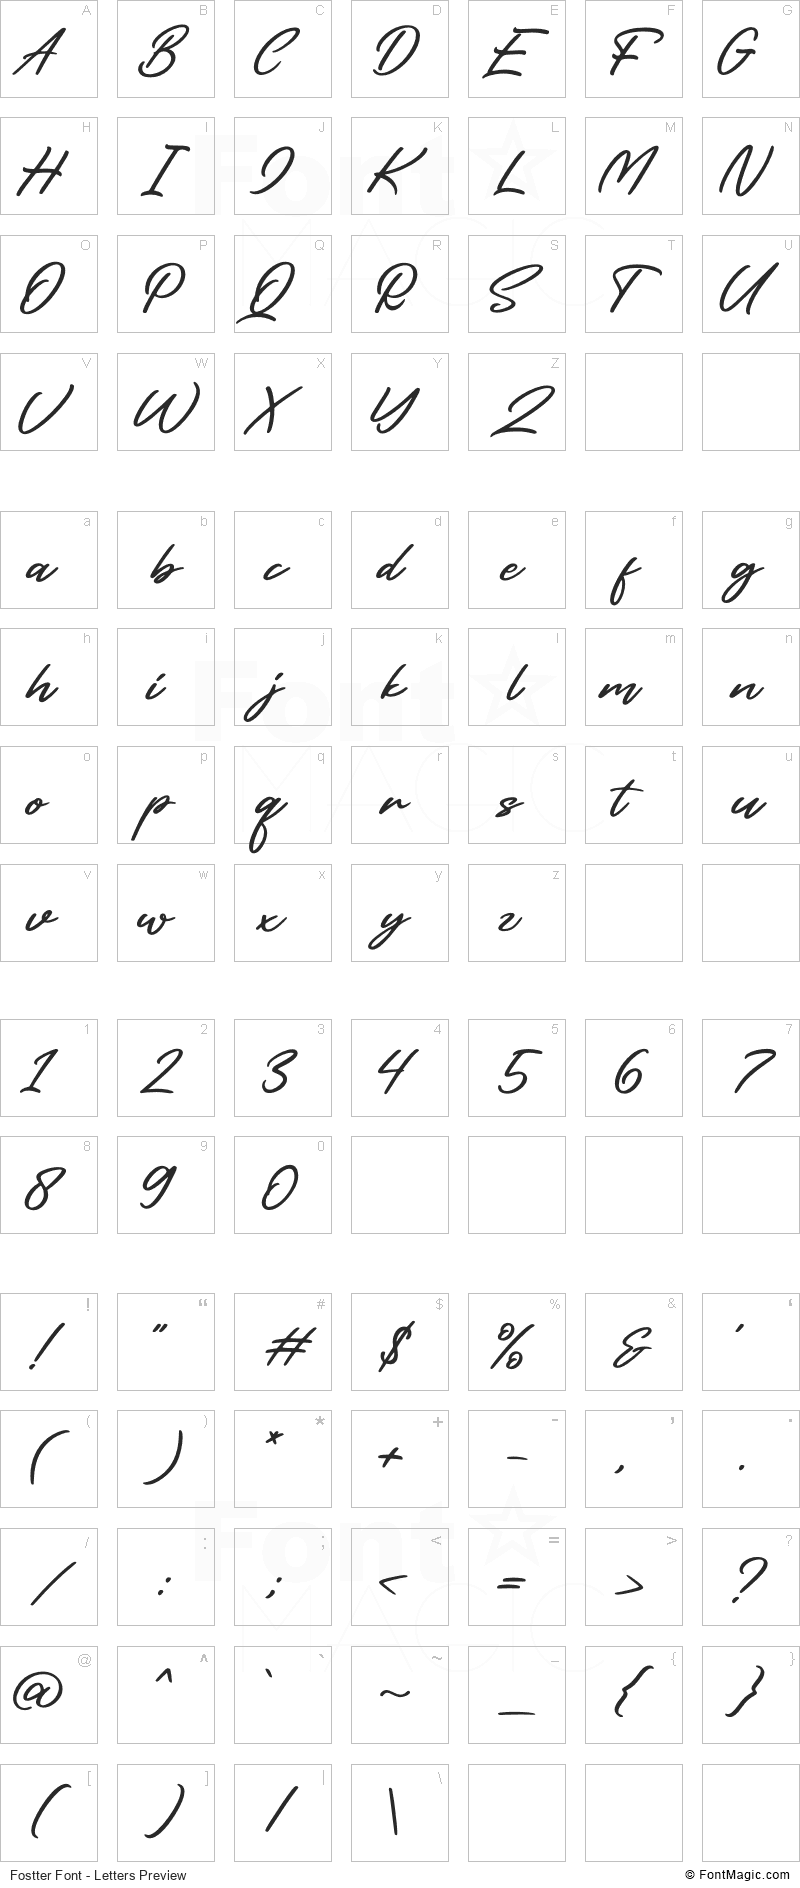 Fostter Font - All Latters Preview Chart